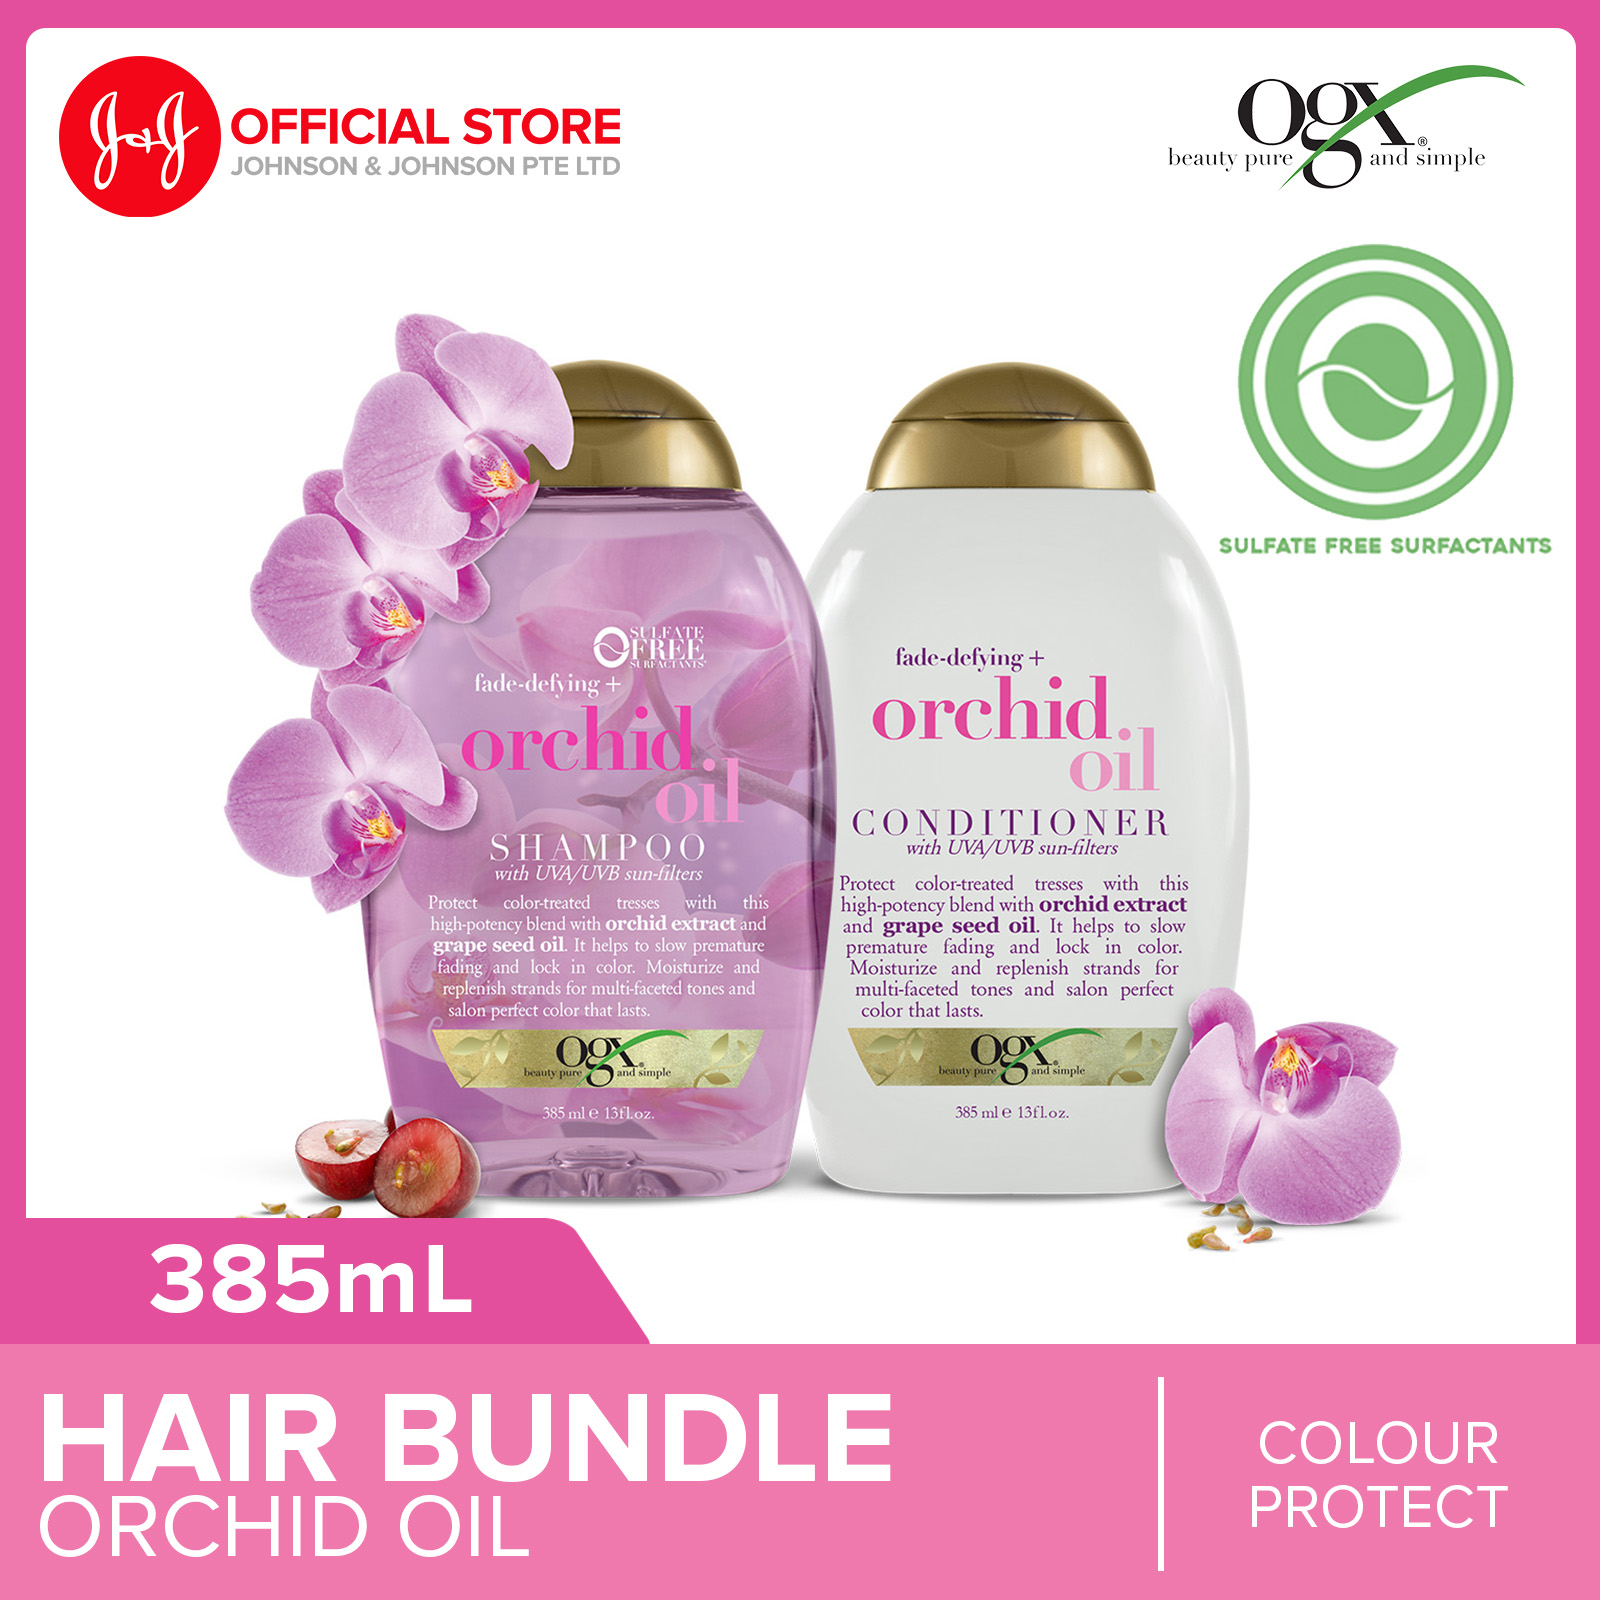 OGX Orchid Oil Shampoo and Conditioner Set | Lazada Singapore